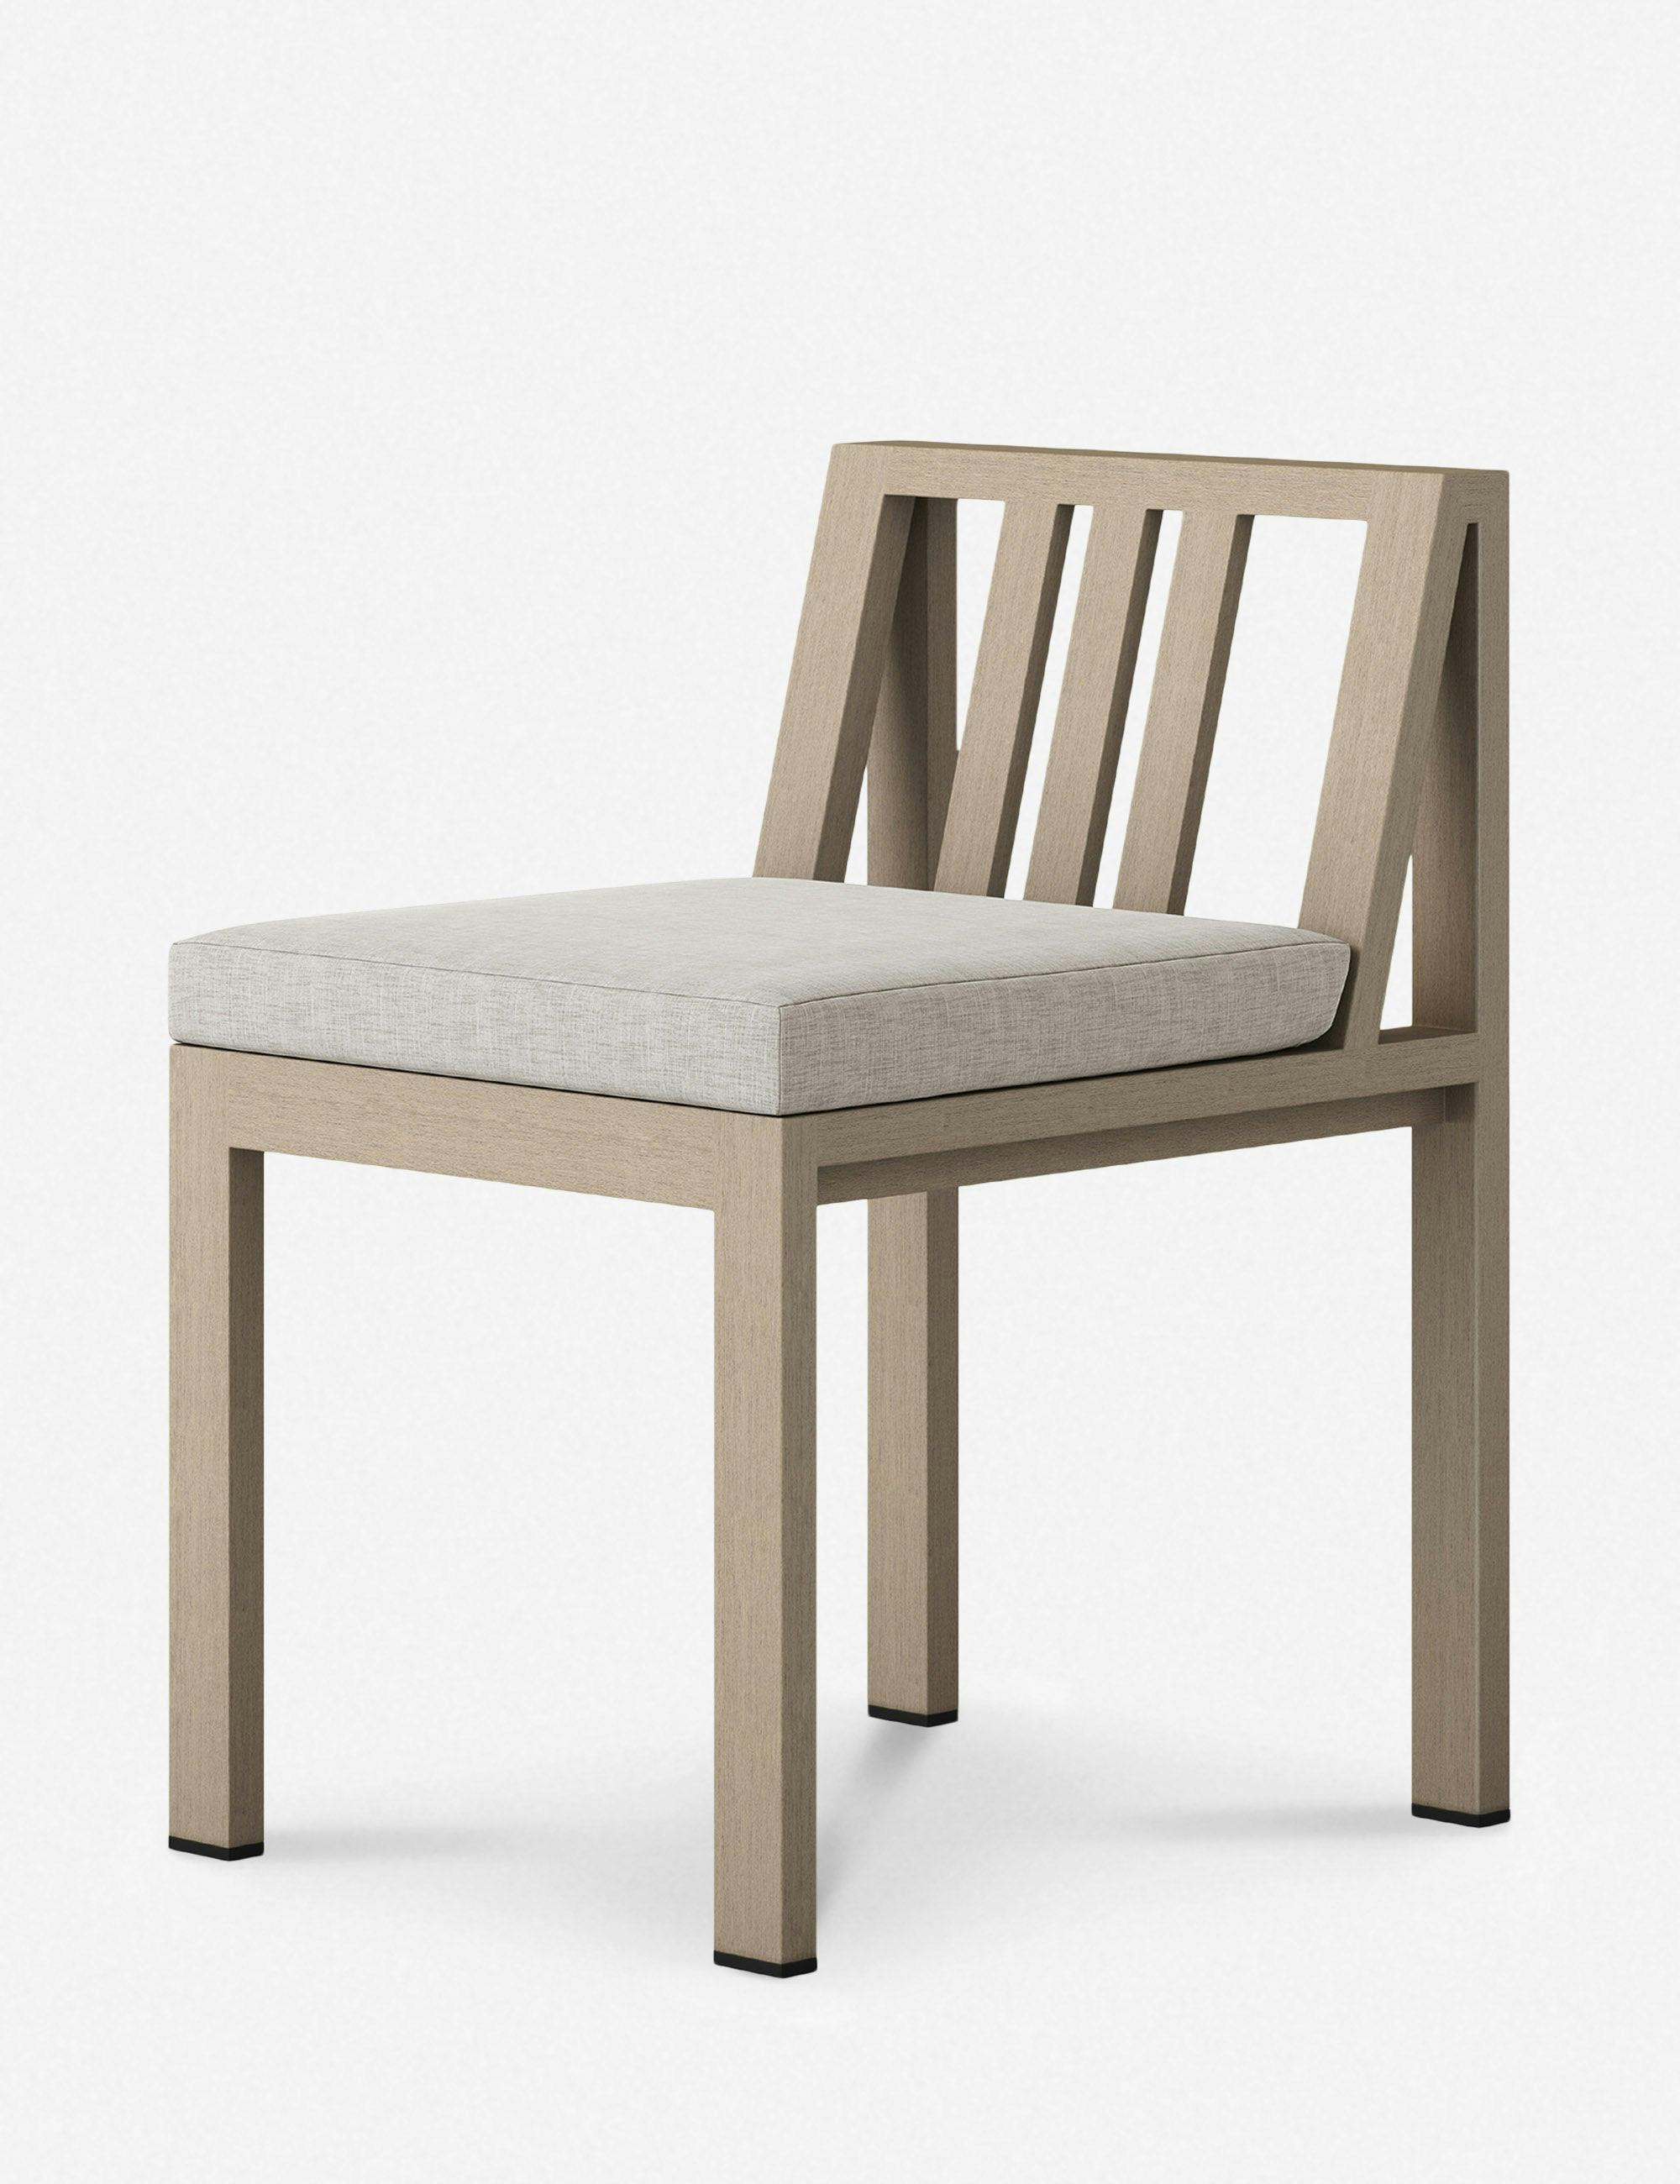 Mona Architectural Teak Outdoor Dining Chair with Gray Cushions